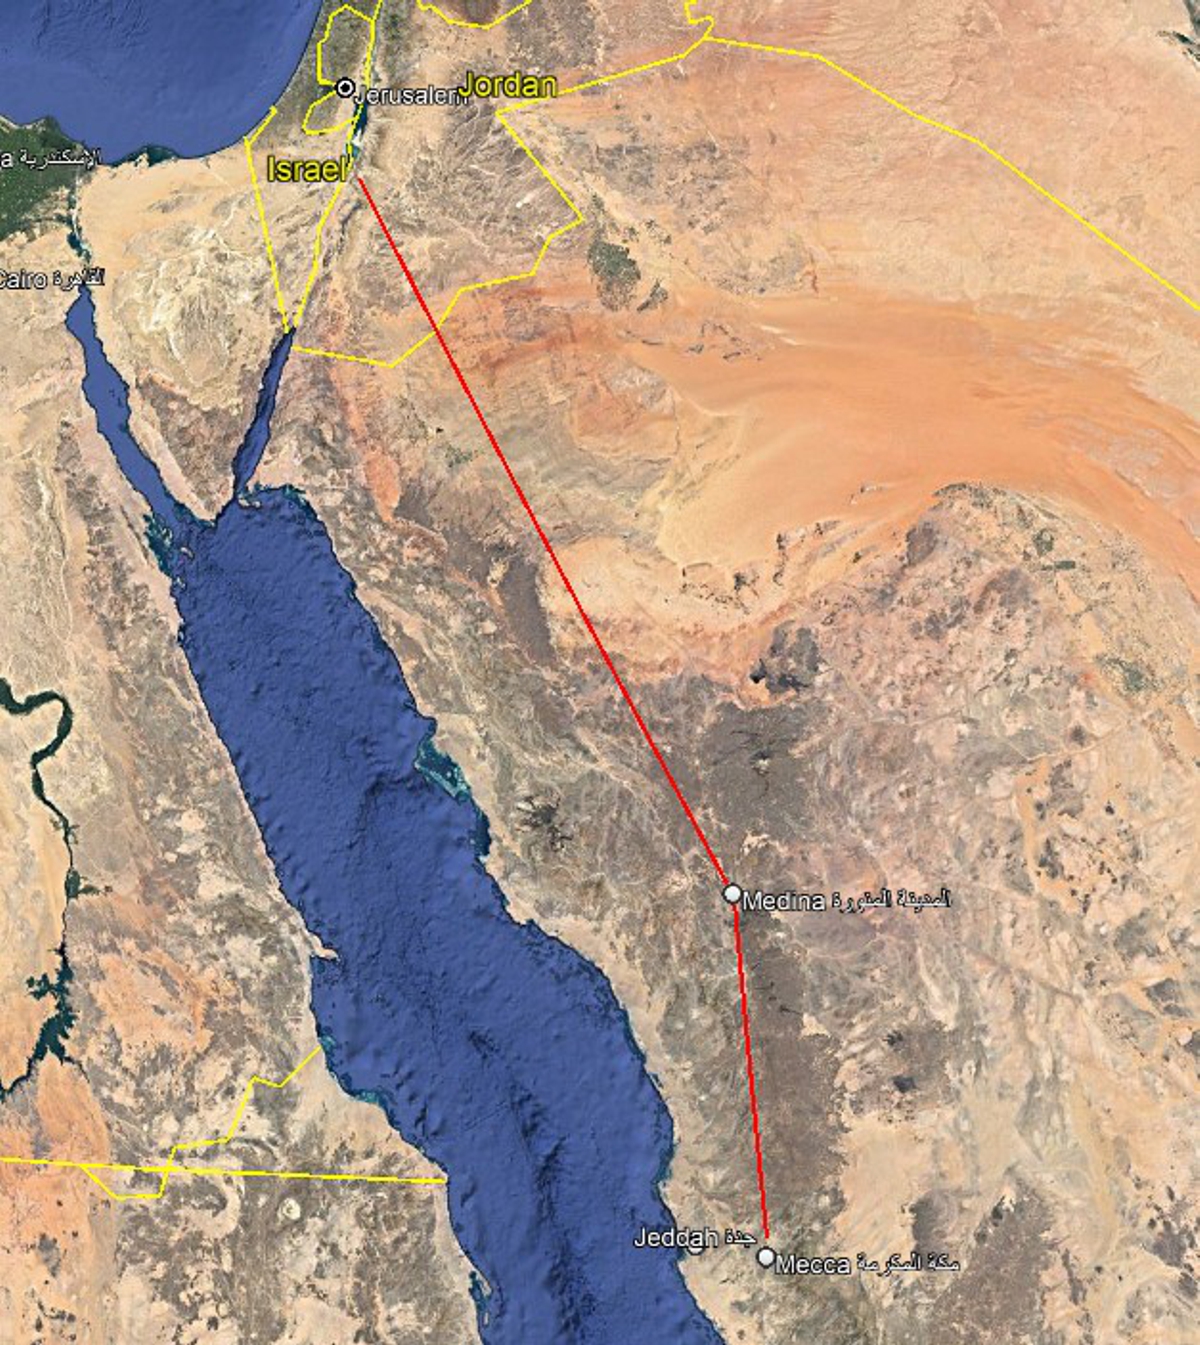 Red line from Medina north towards Petra & Jerusalem, and a red line south of Medina towards Mecca.